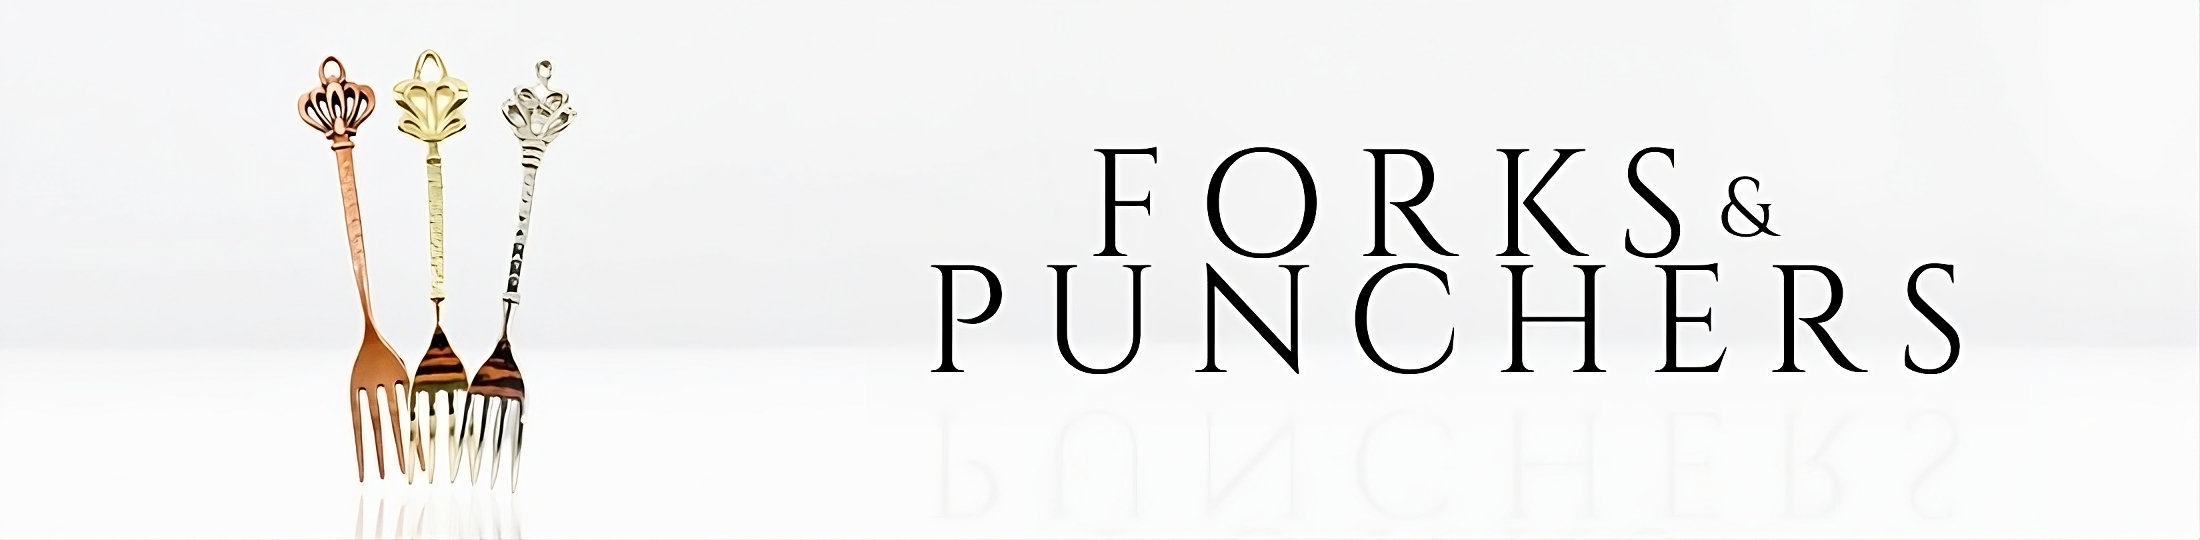 Forks and punchers for foil